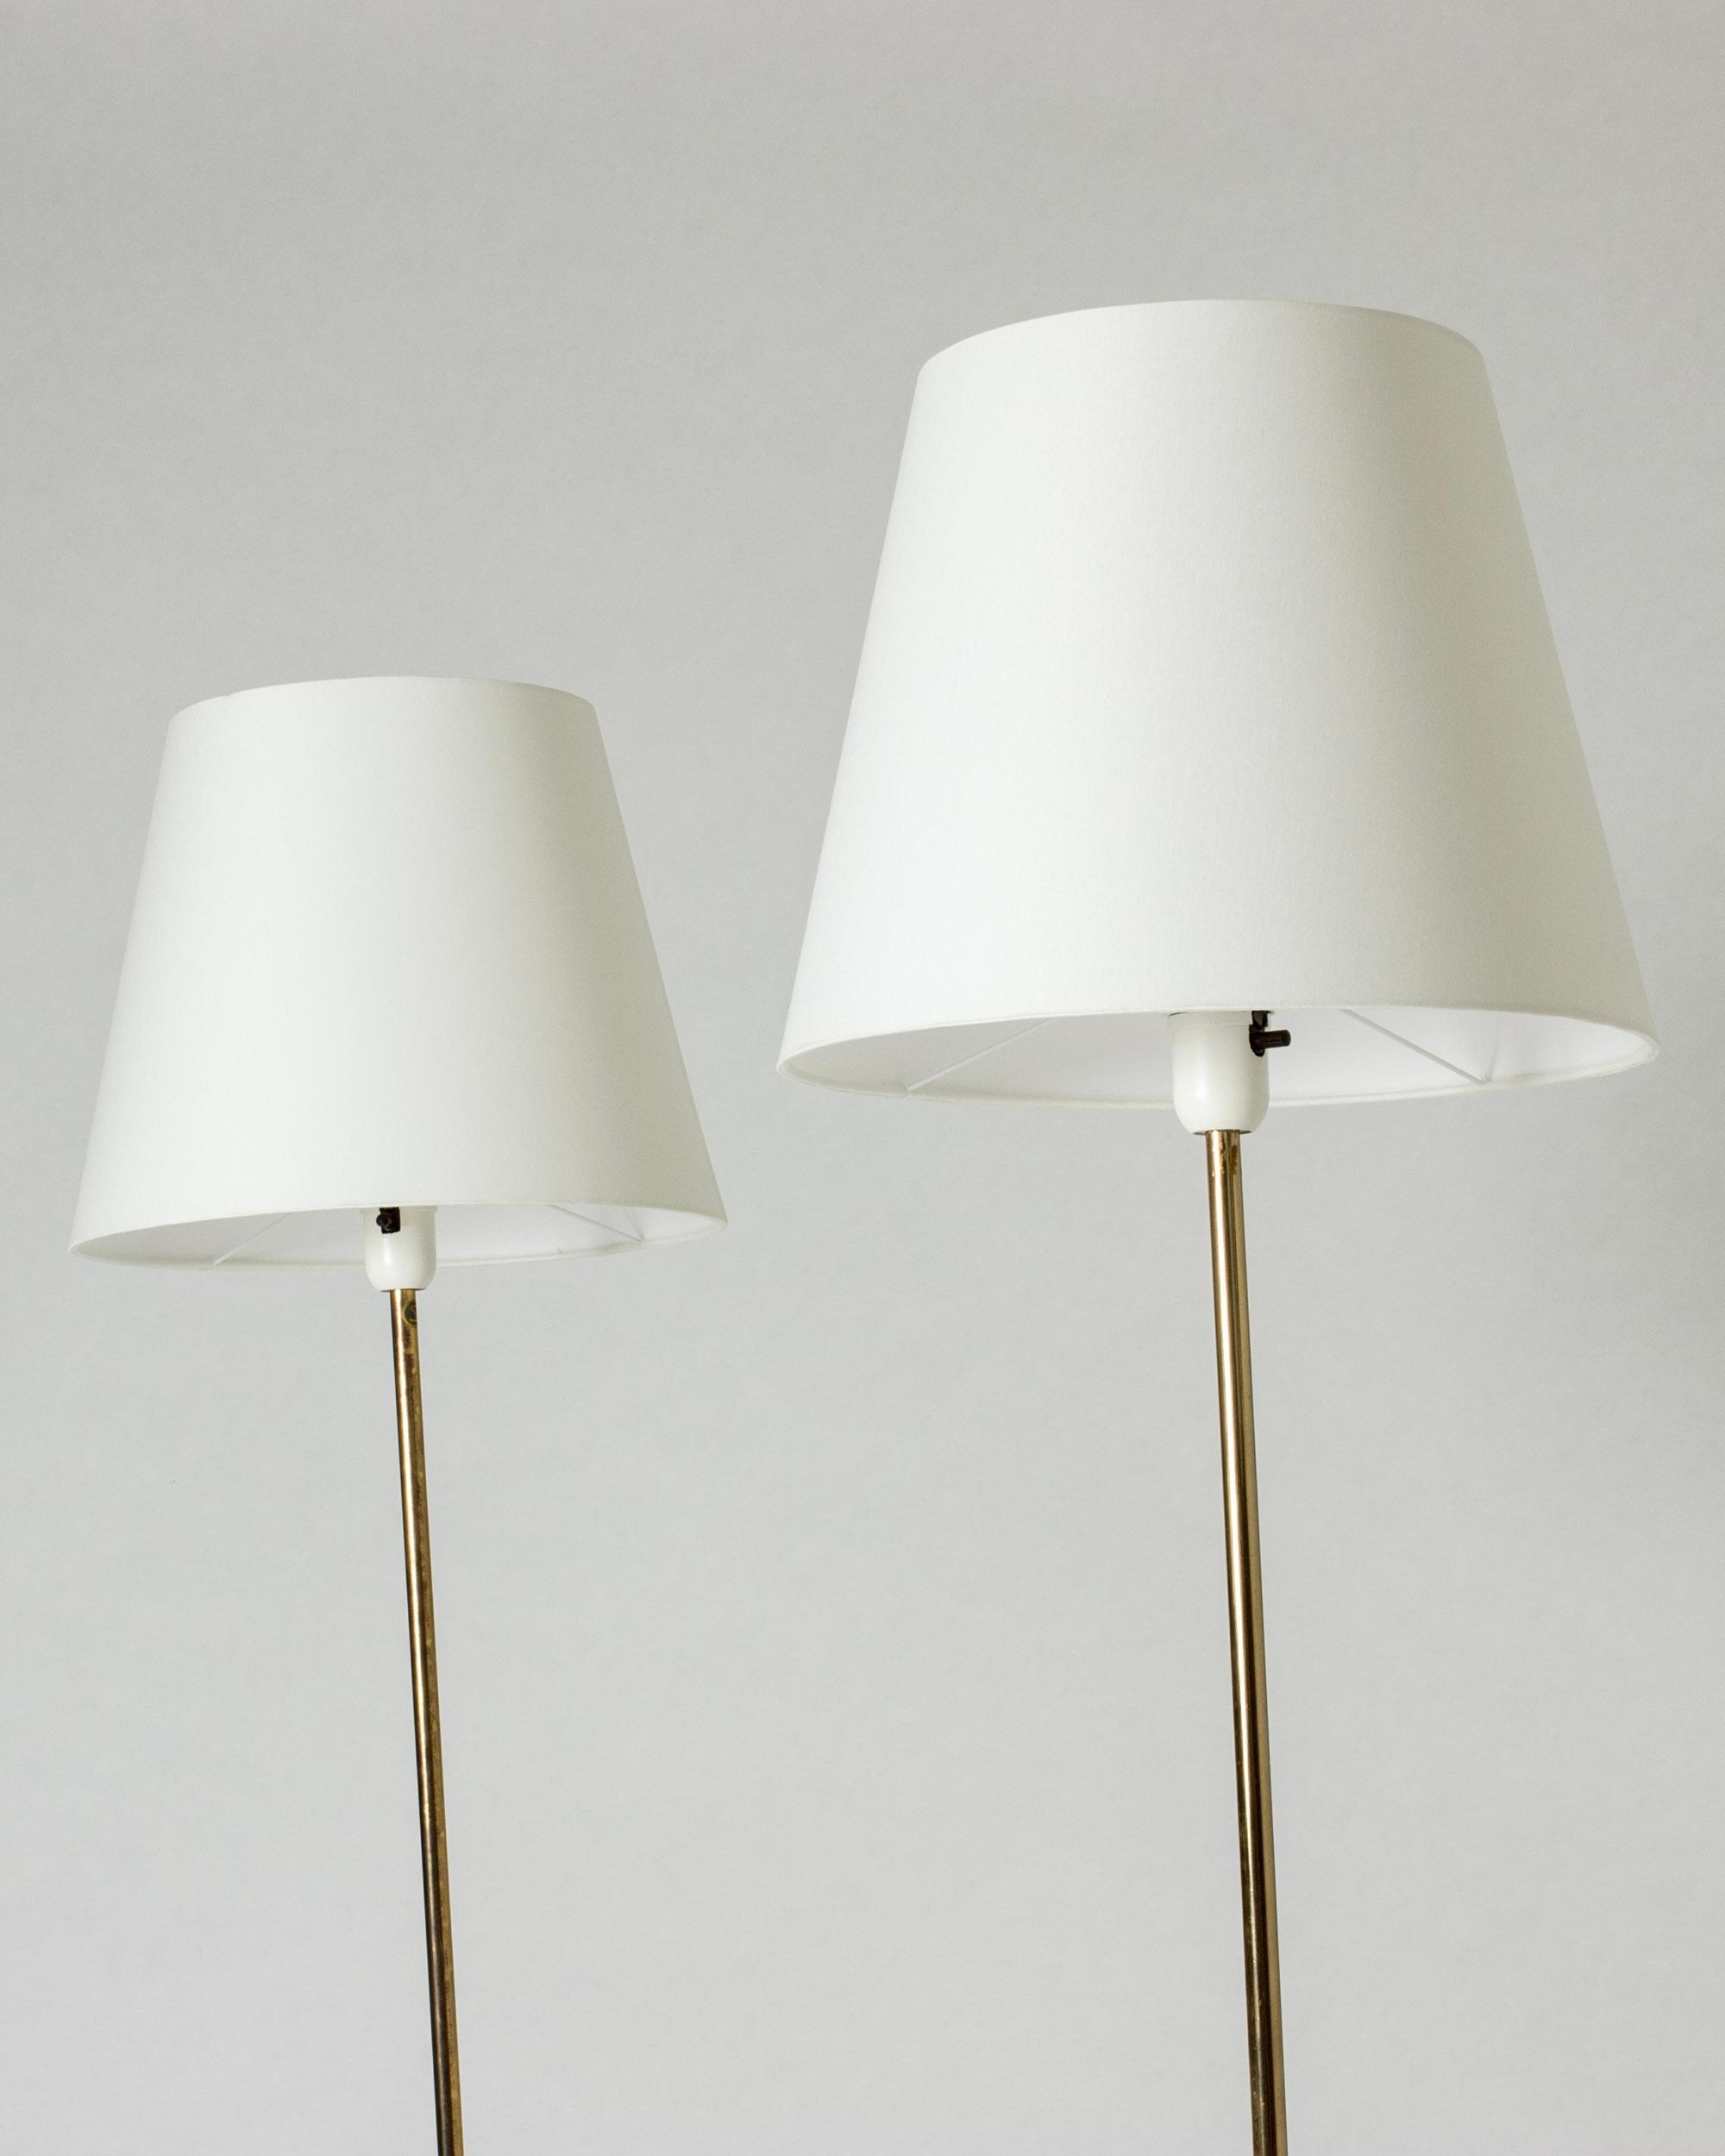 Swedish Midcentury Floor Lamps from Bergboms, Sweden, 1950s In Good Condition For Sale In Stockholm, SE